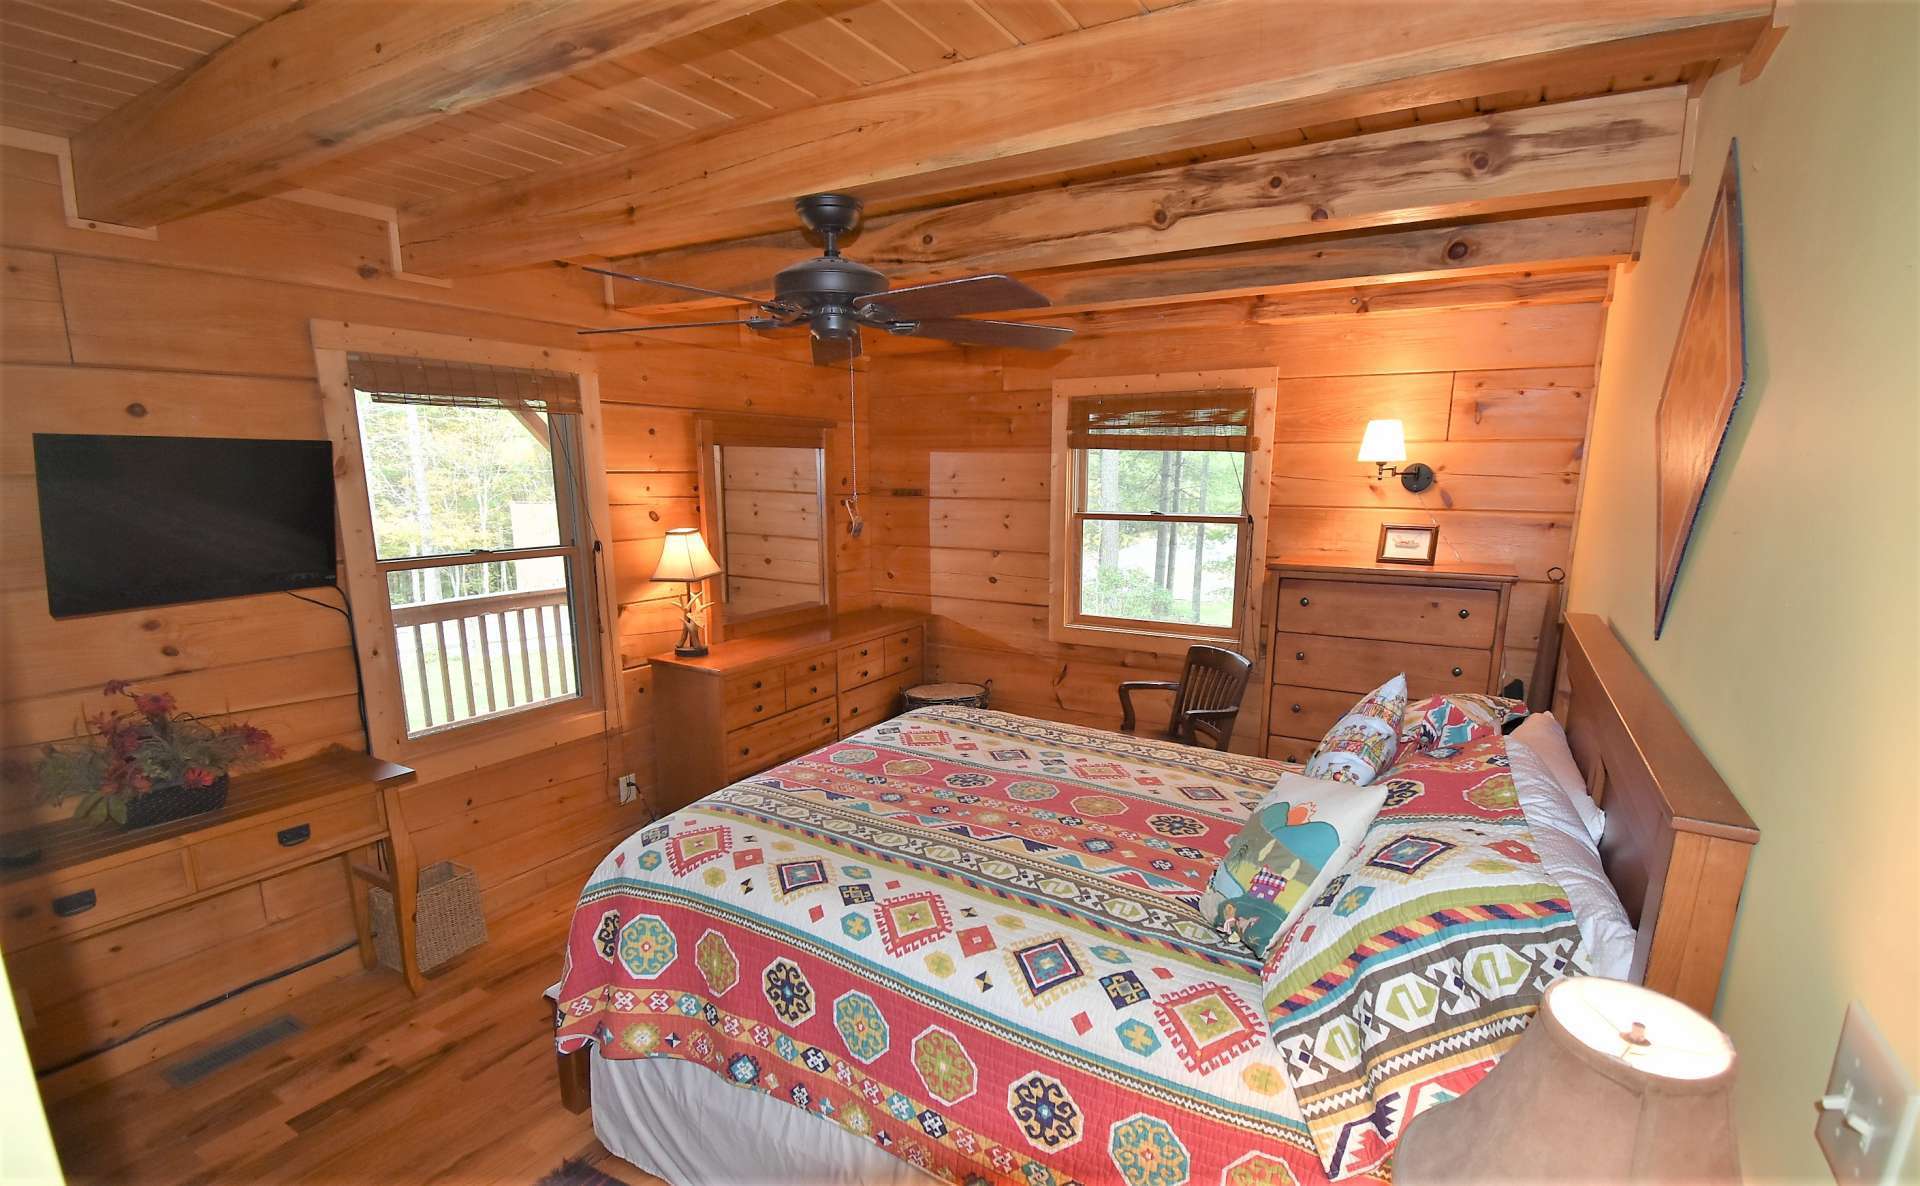 The main level master bedroom is spacious and features wood floor and exposed beams.